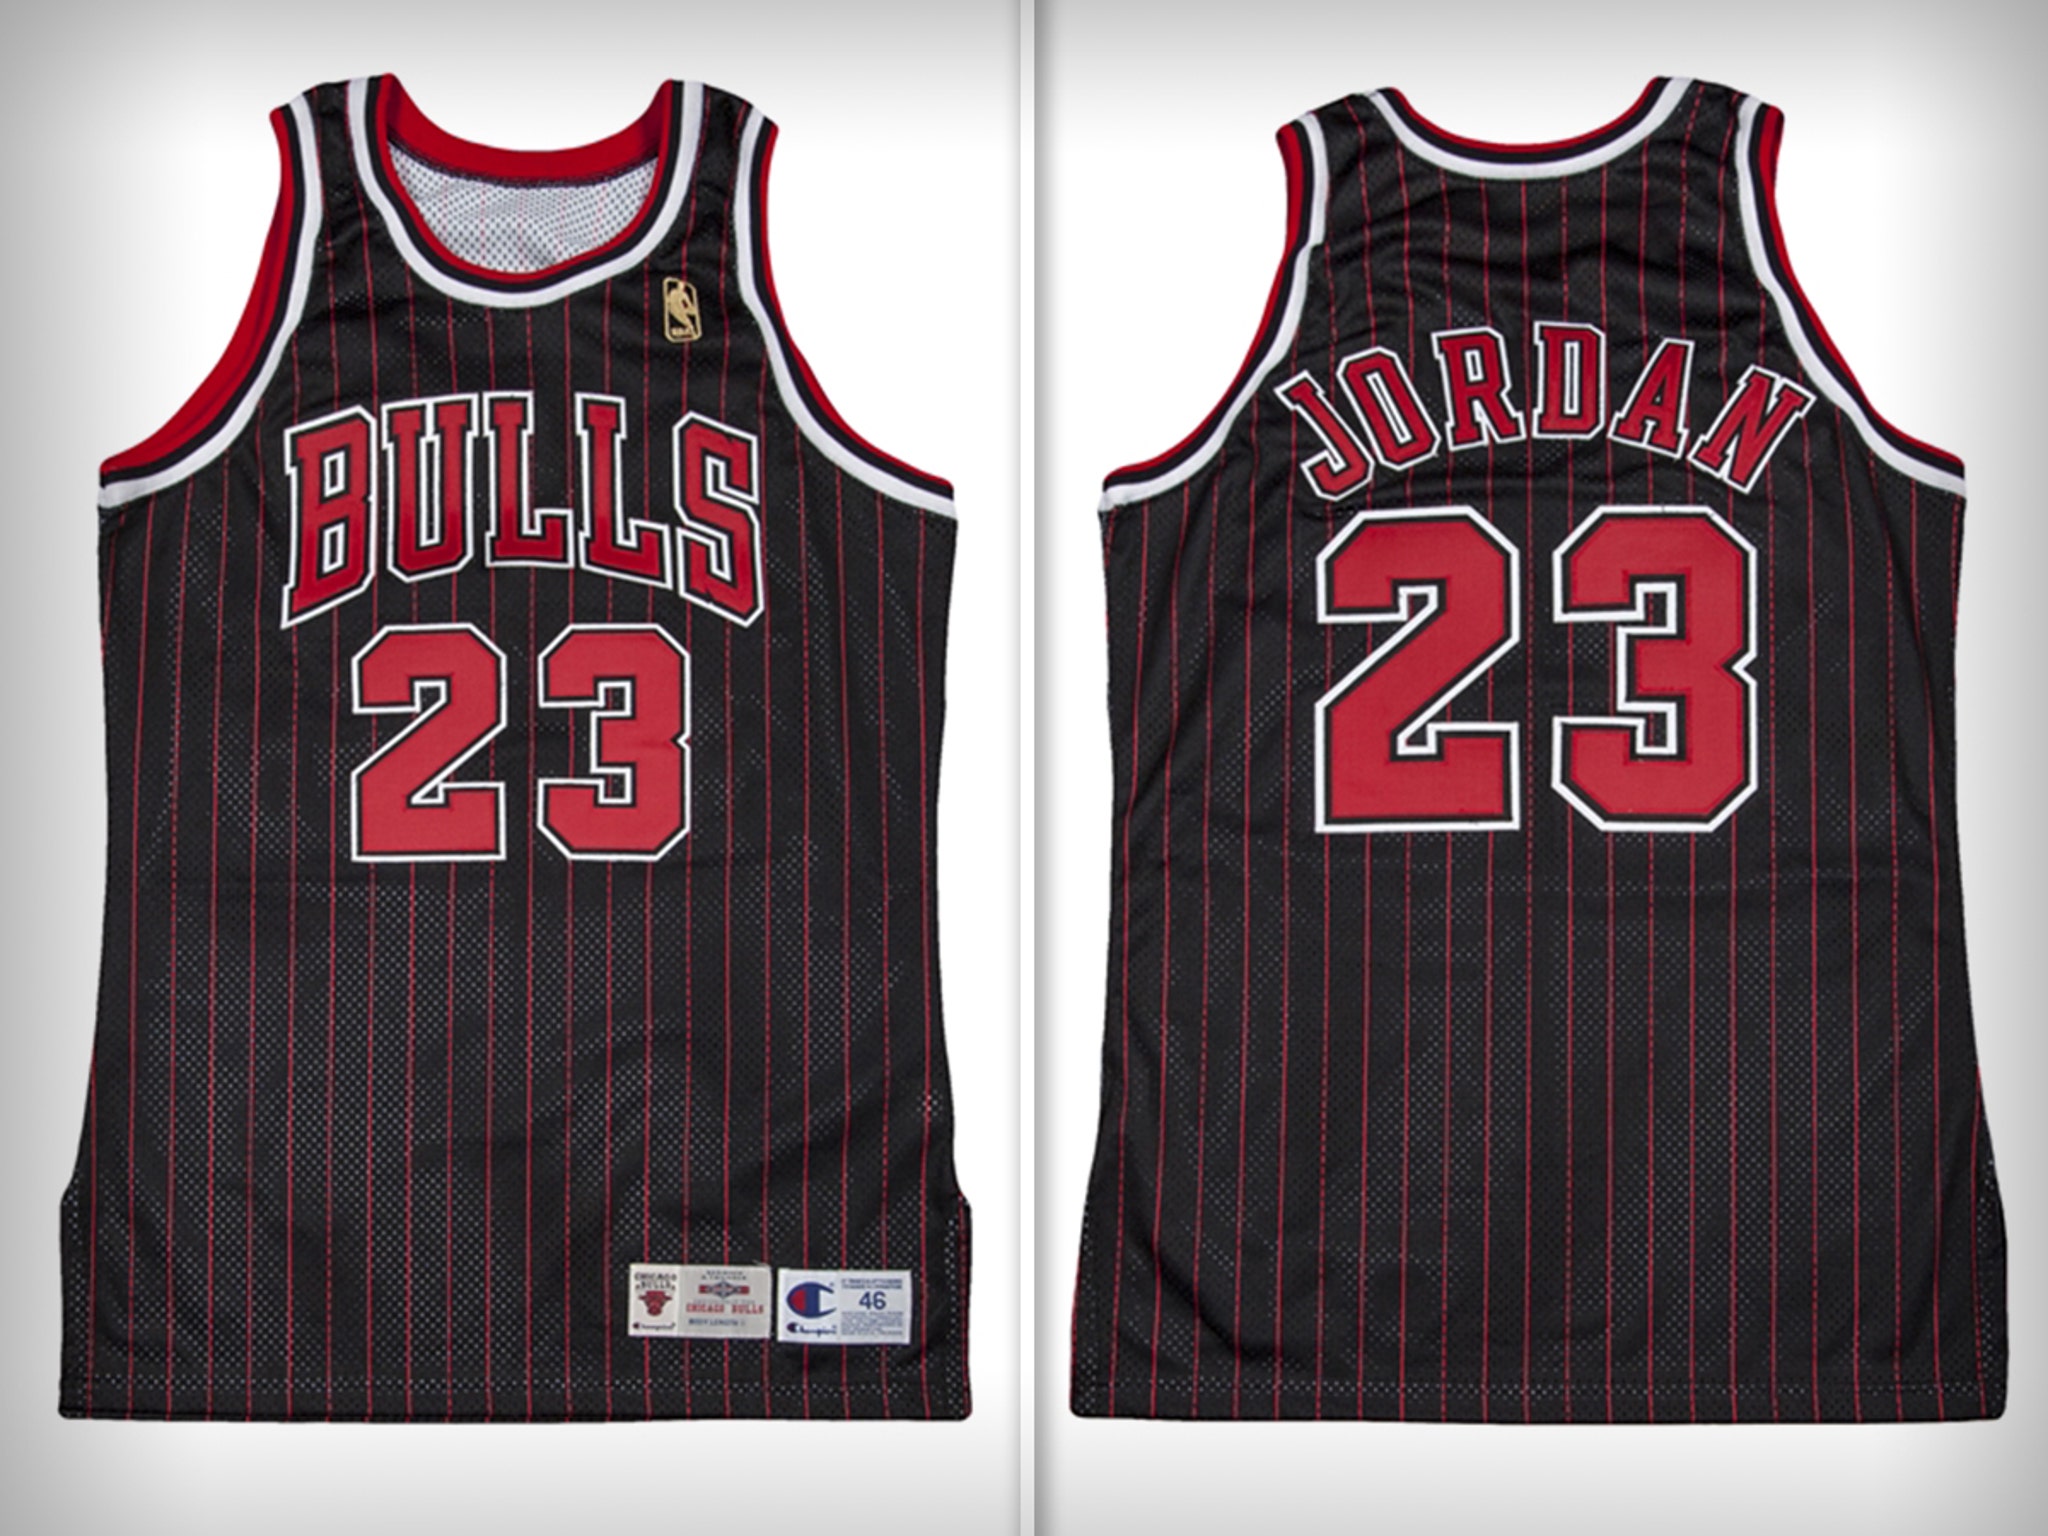 Michael Jordan 'Last Dance' Jersey Sold At Record Price In Auction